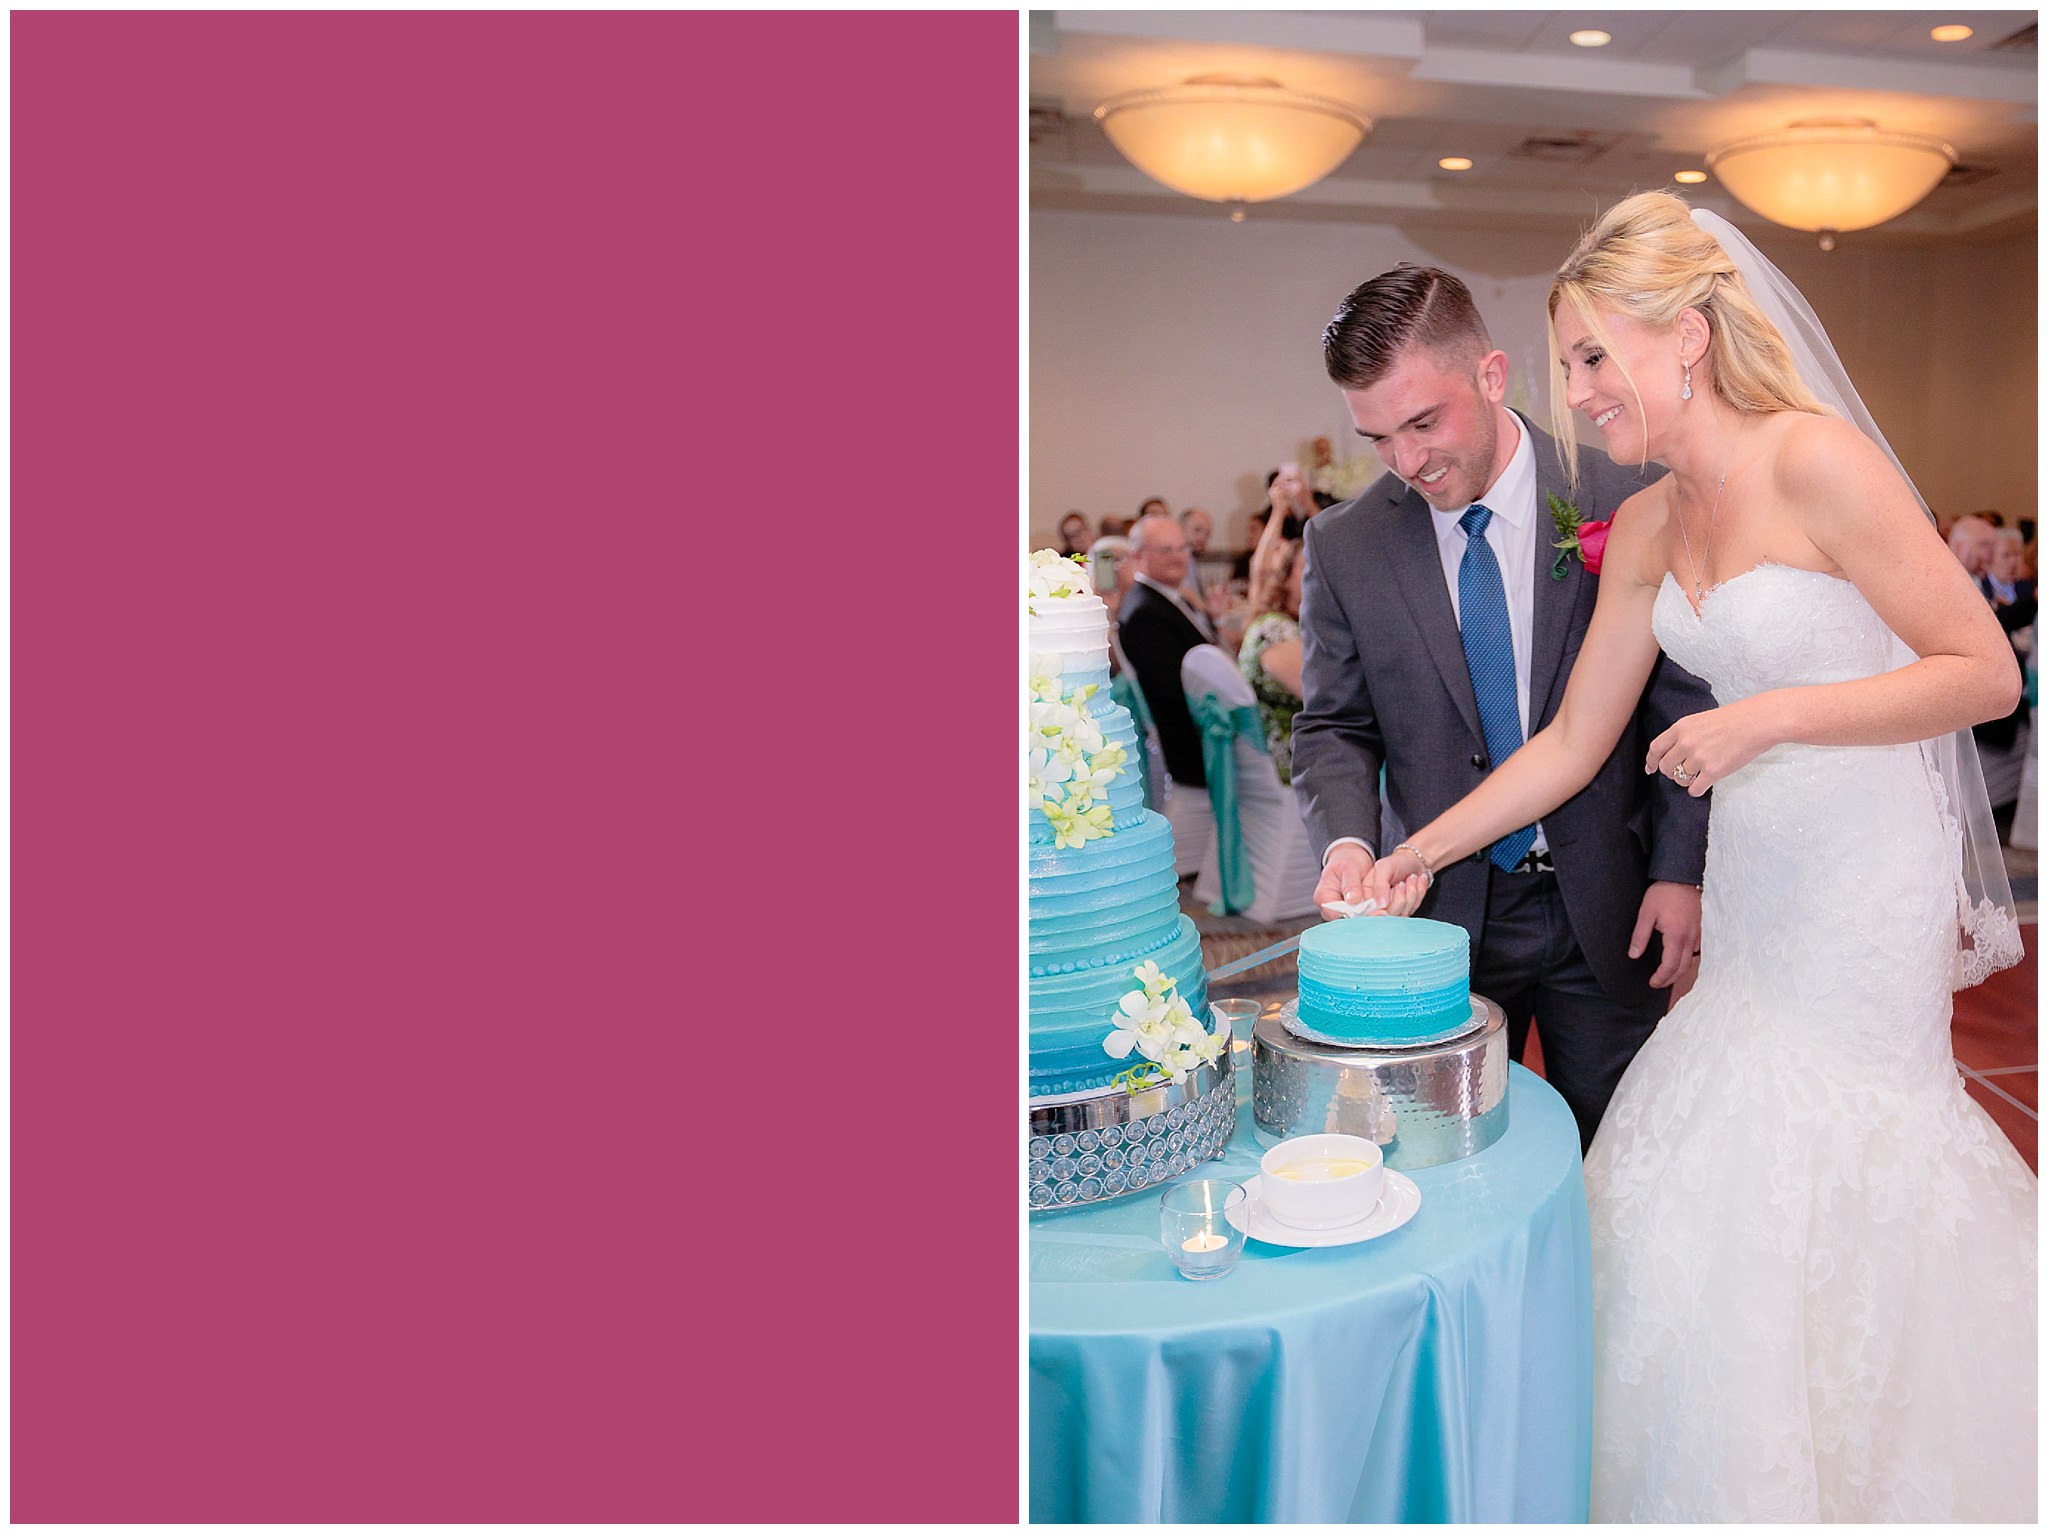 Bride & groom cut the cake at the Pittsburgh Airport Marriott